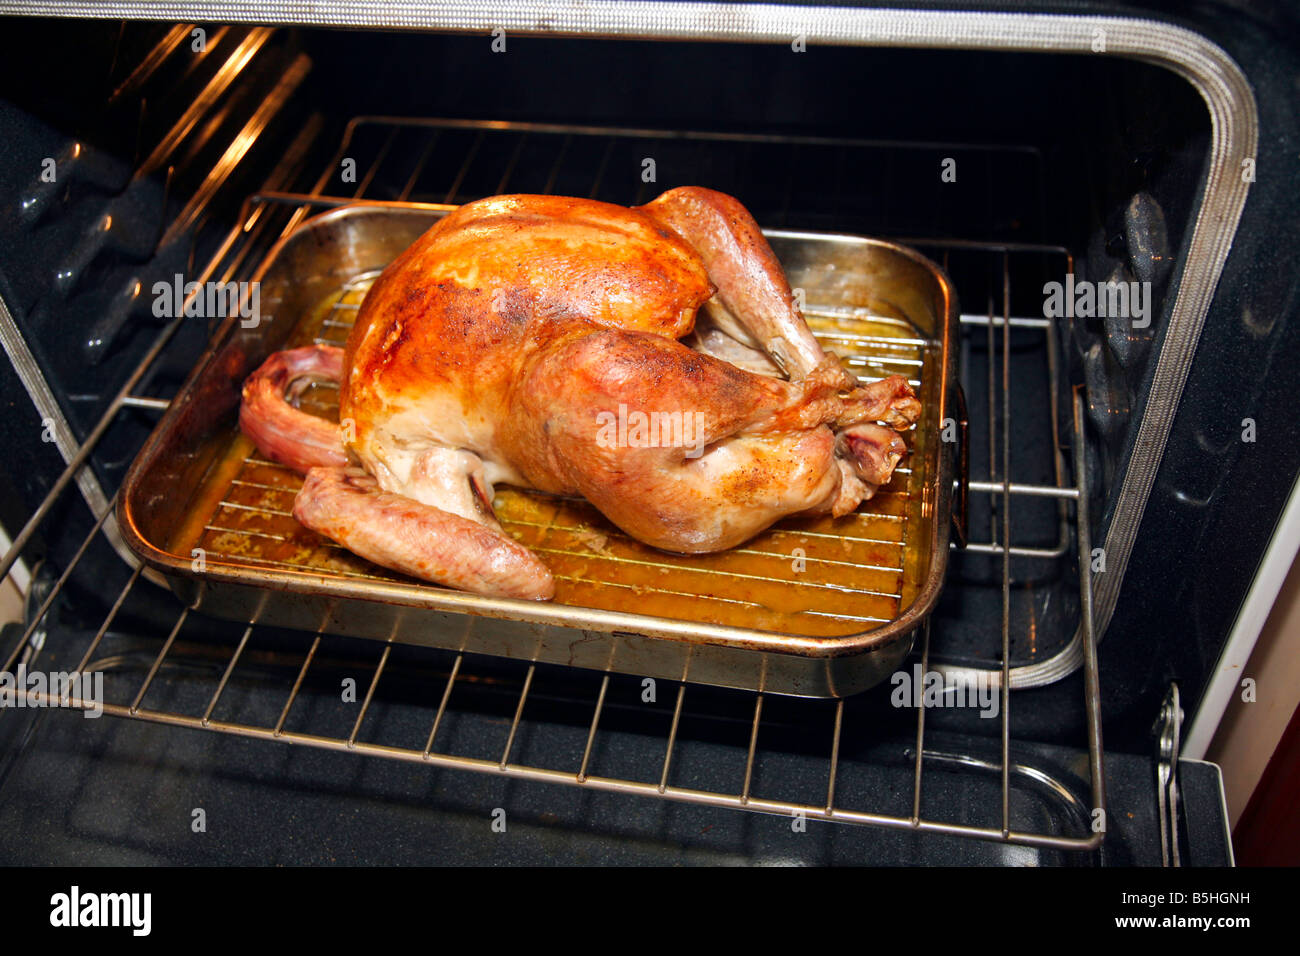 Turkey in the oven Preparing a Thanksgiving or Christmas Turkey Dinner in North America Stock Photo